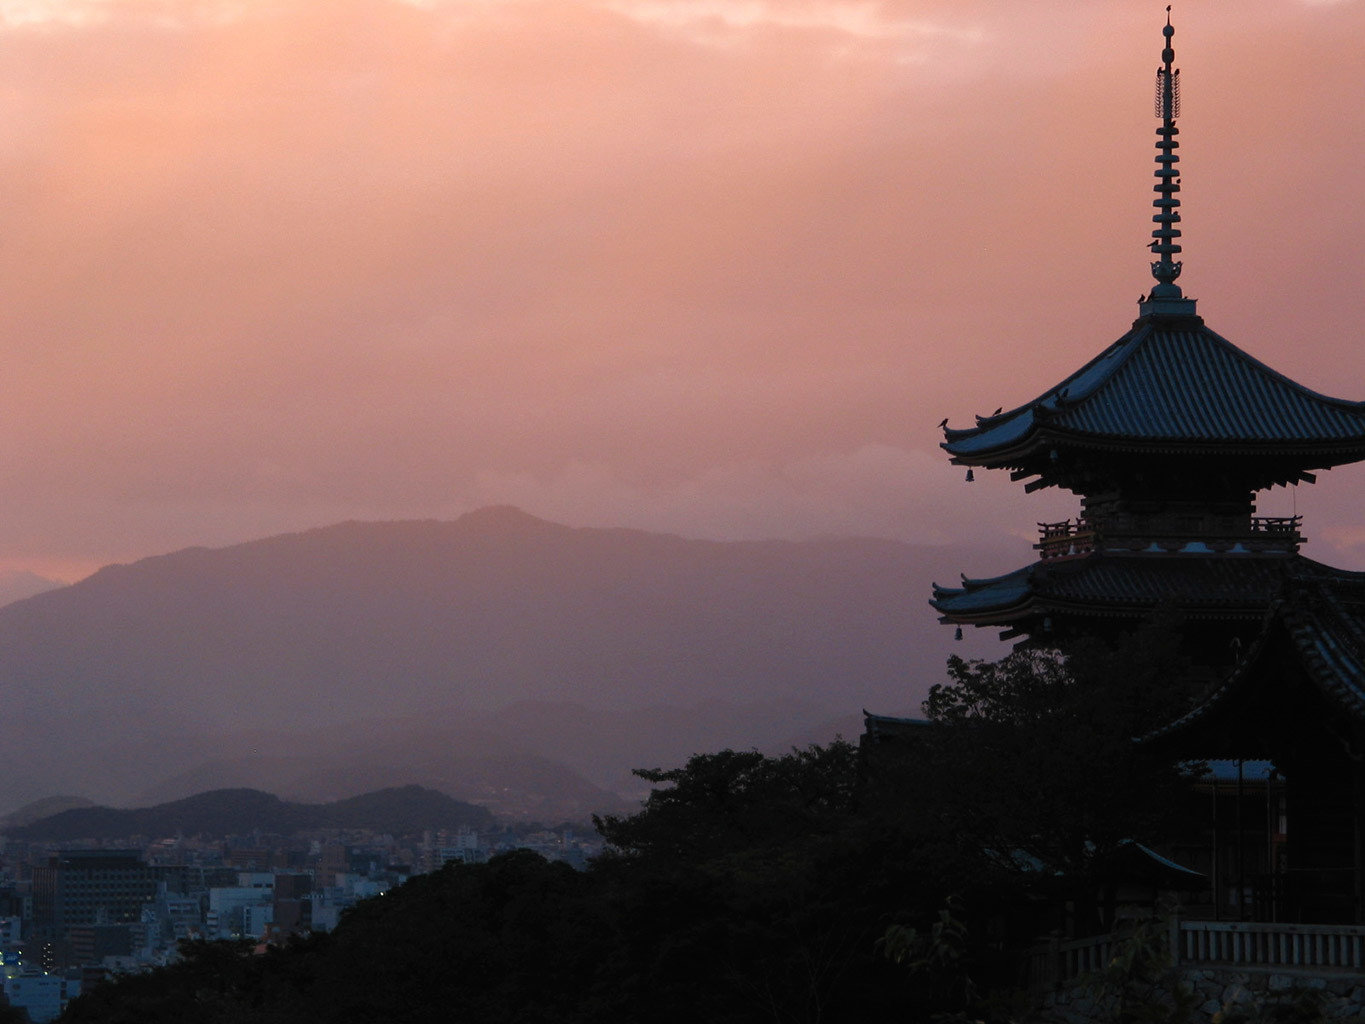 Beauty Buildings Cultural Health + Wellness Japan Kyoto Natural wonders San Francisco Scenic views Travel Tips outdoor sky atmospheric phenomenon dawn sunrise Sunset horizon cloud tower evening dusk morning mountain reflection temple distance